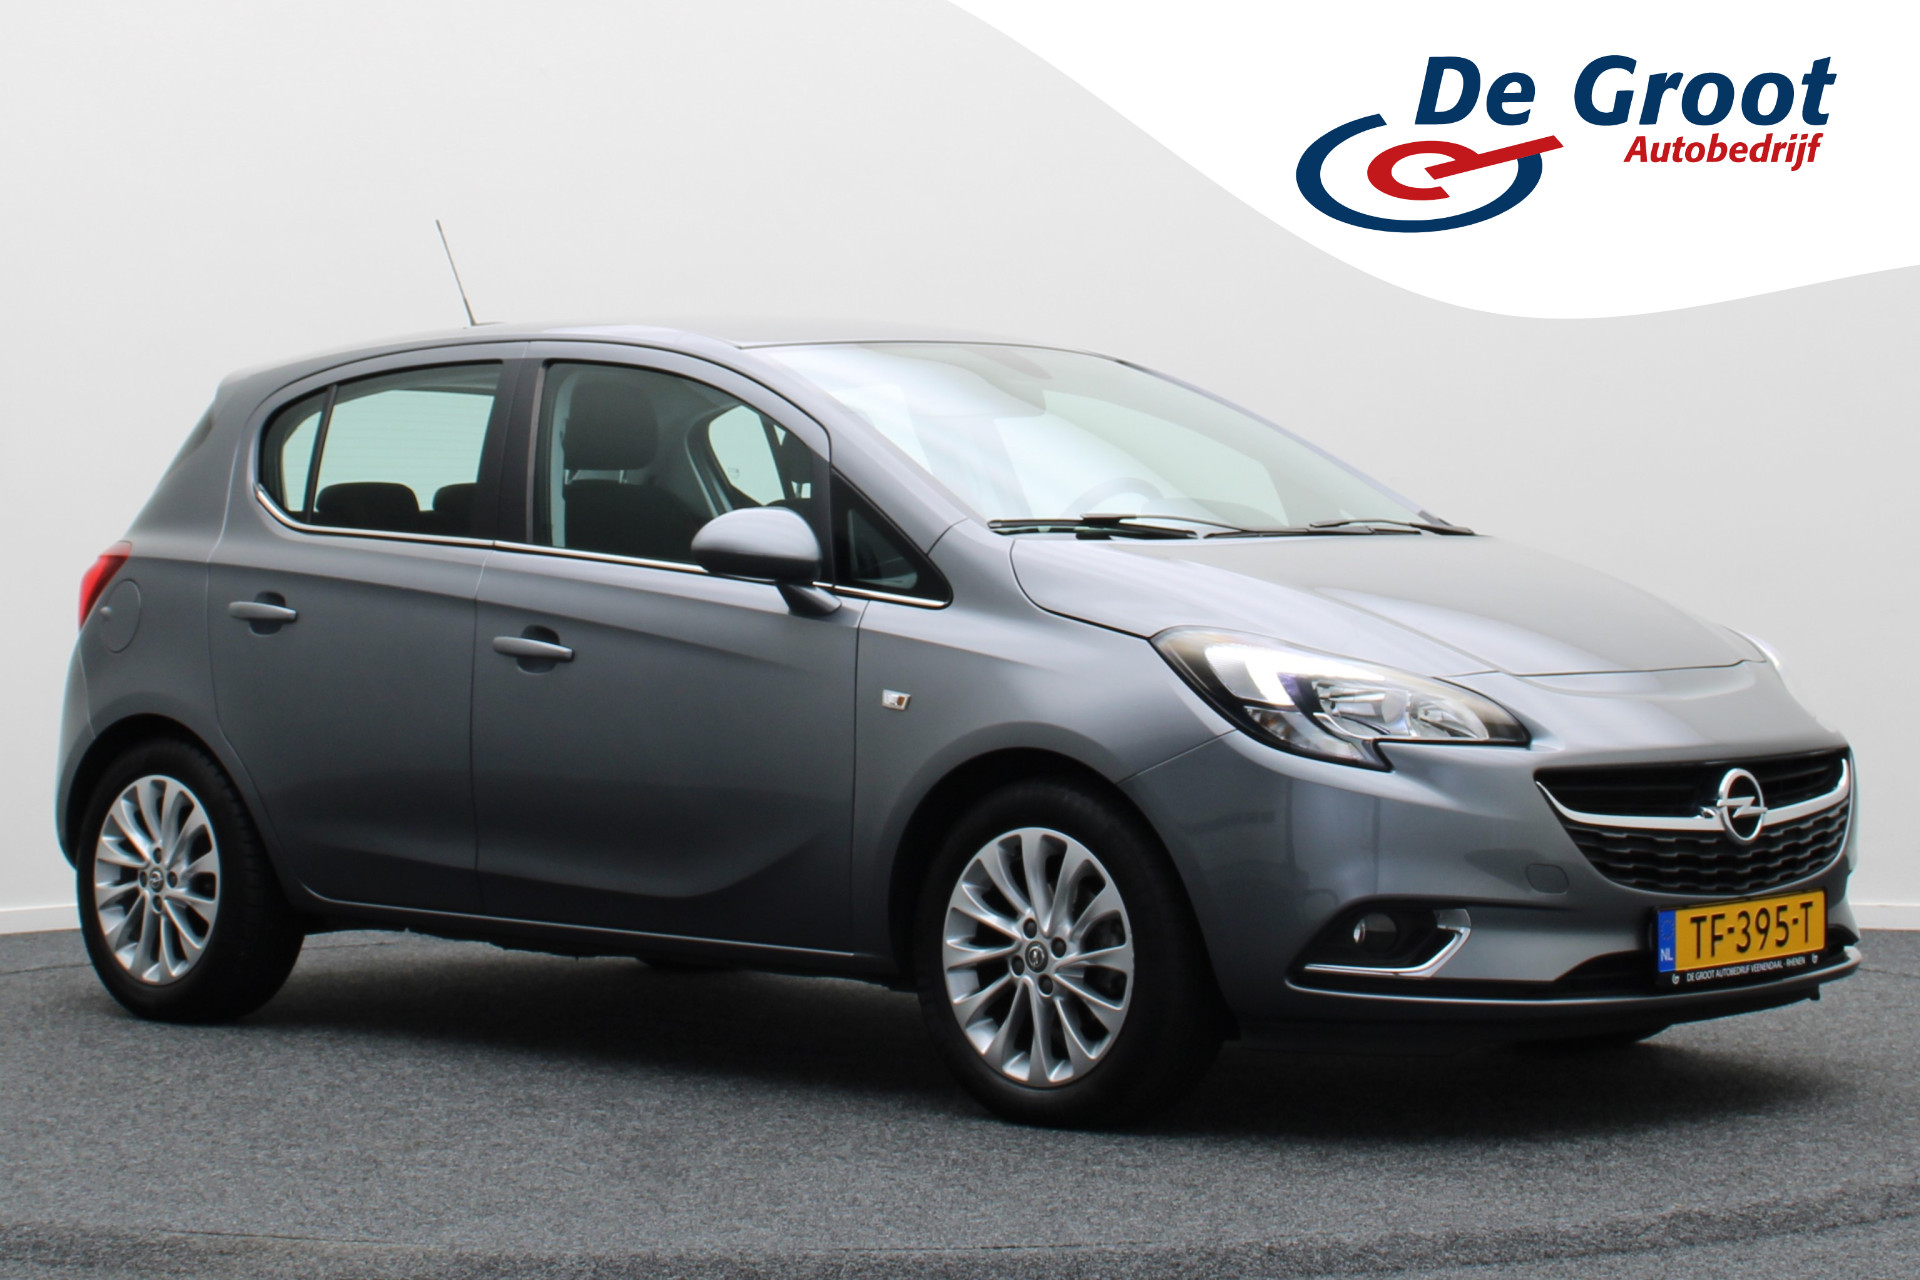 Opel Corsa 1.4 Online Edition Automaat Airco, Navigatie, Apple Carplay, Cruise, DAB+, LED, PDC